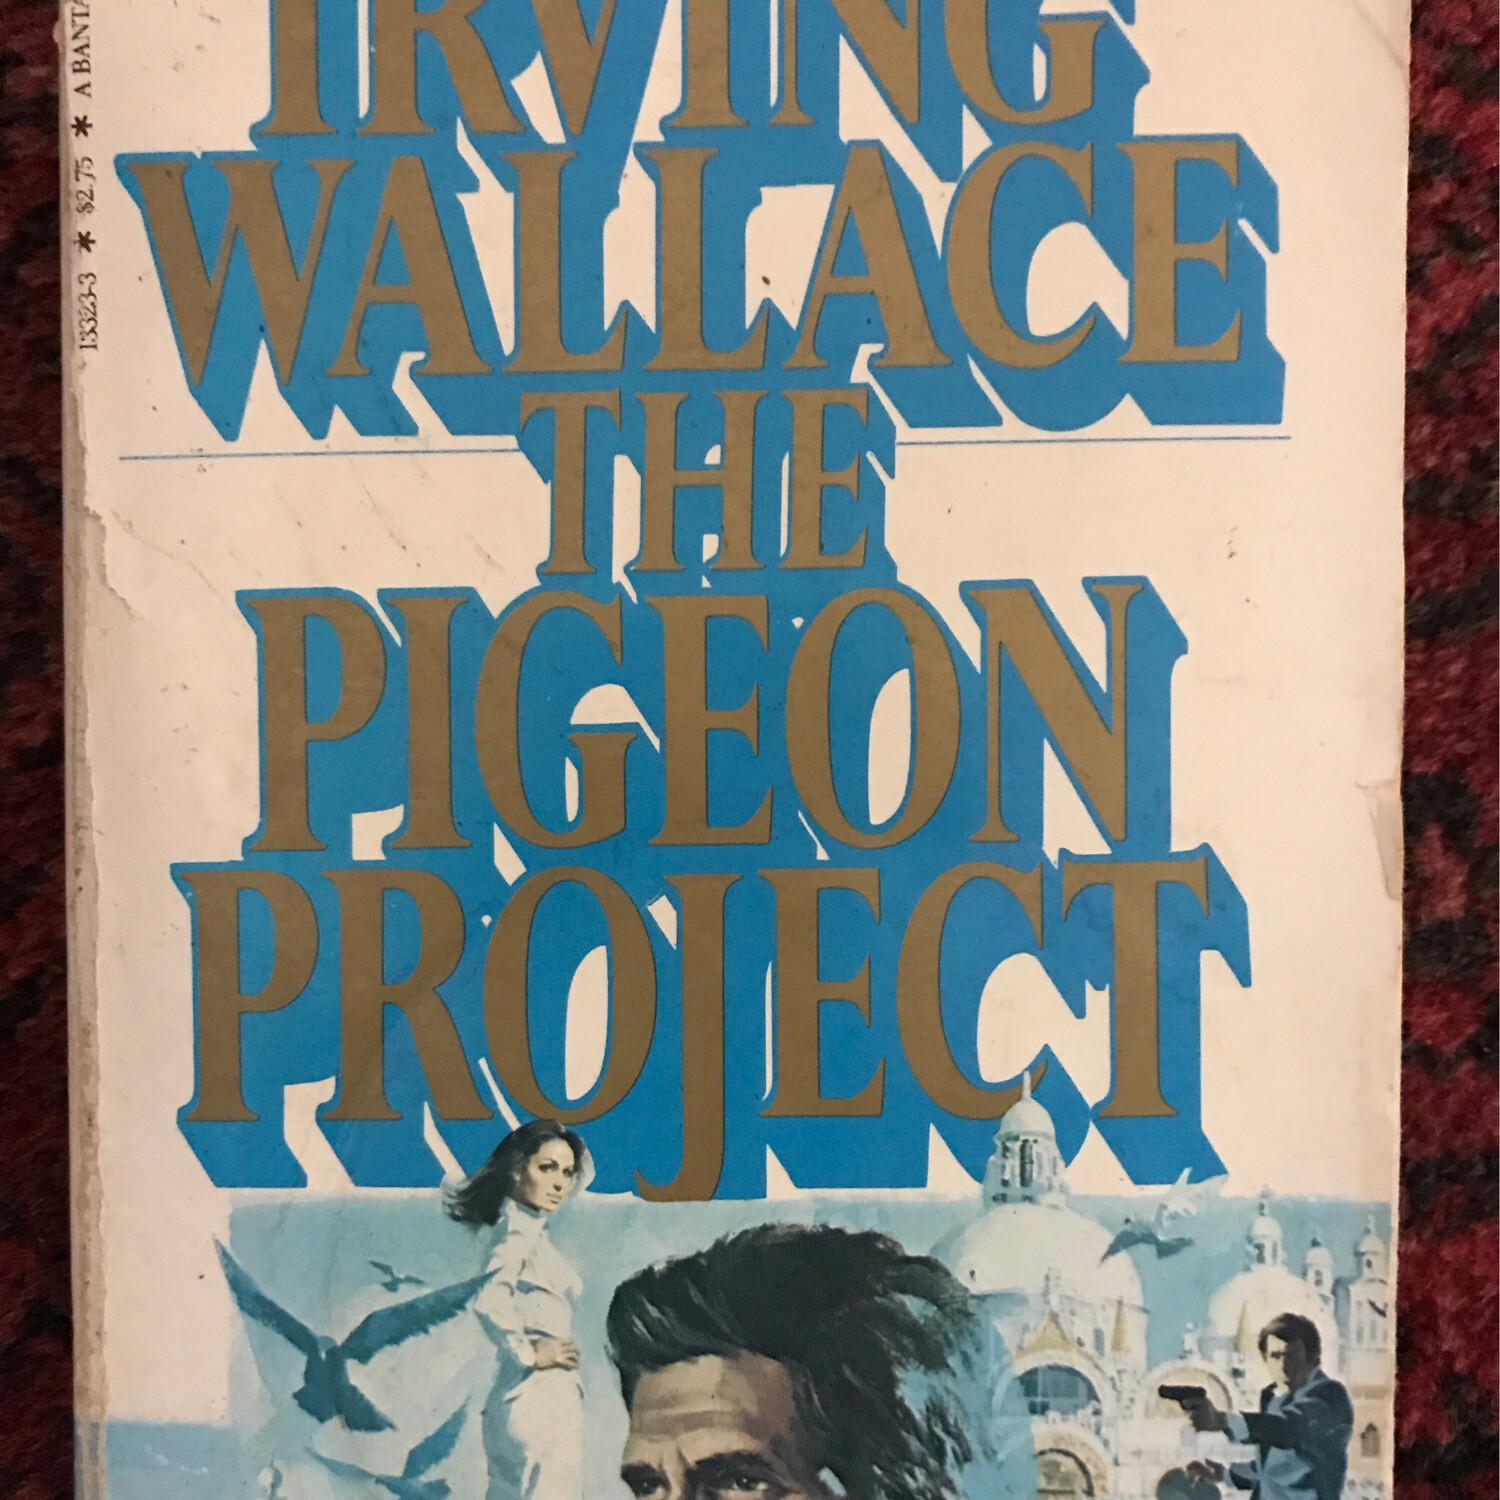 The Pigeon Project, Irving Wallace